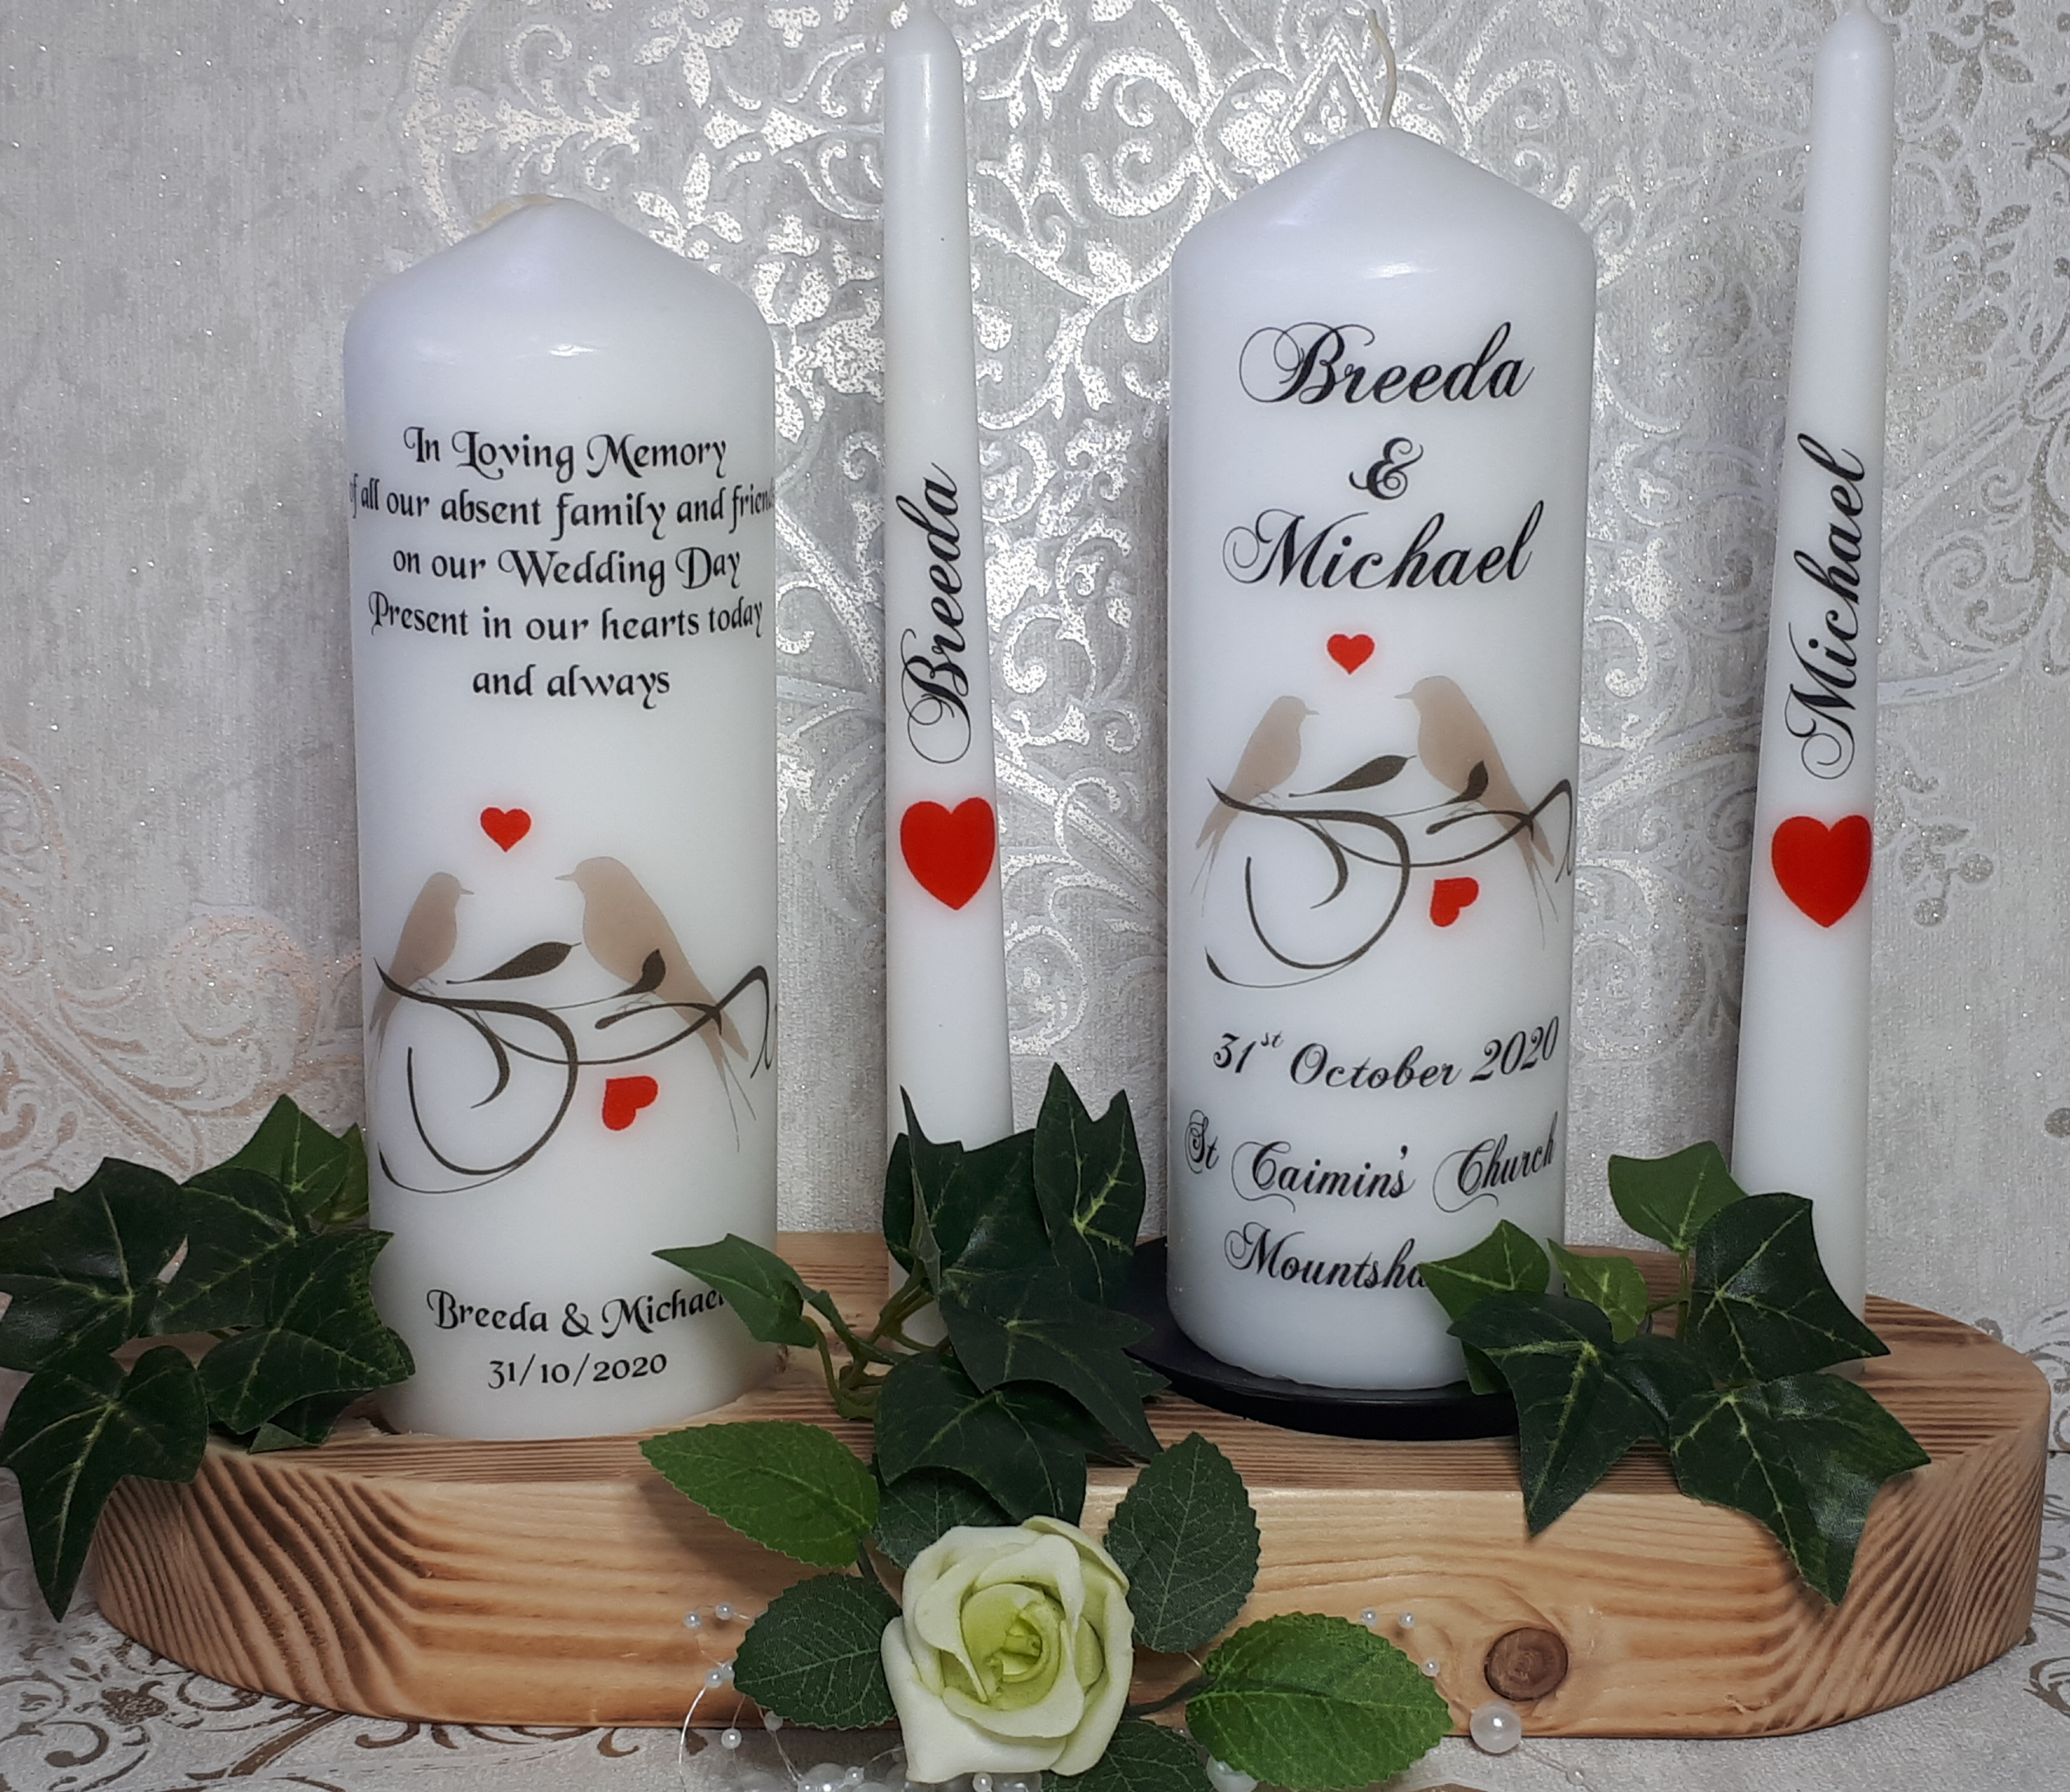 Athenry Candles and Sand Ceremony Kits